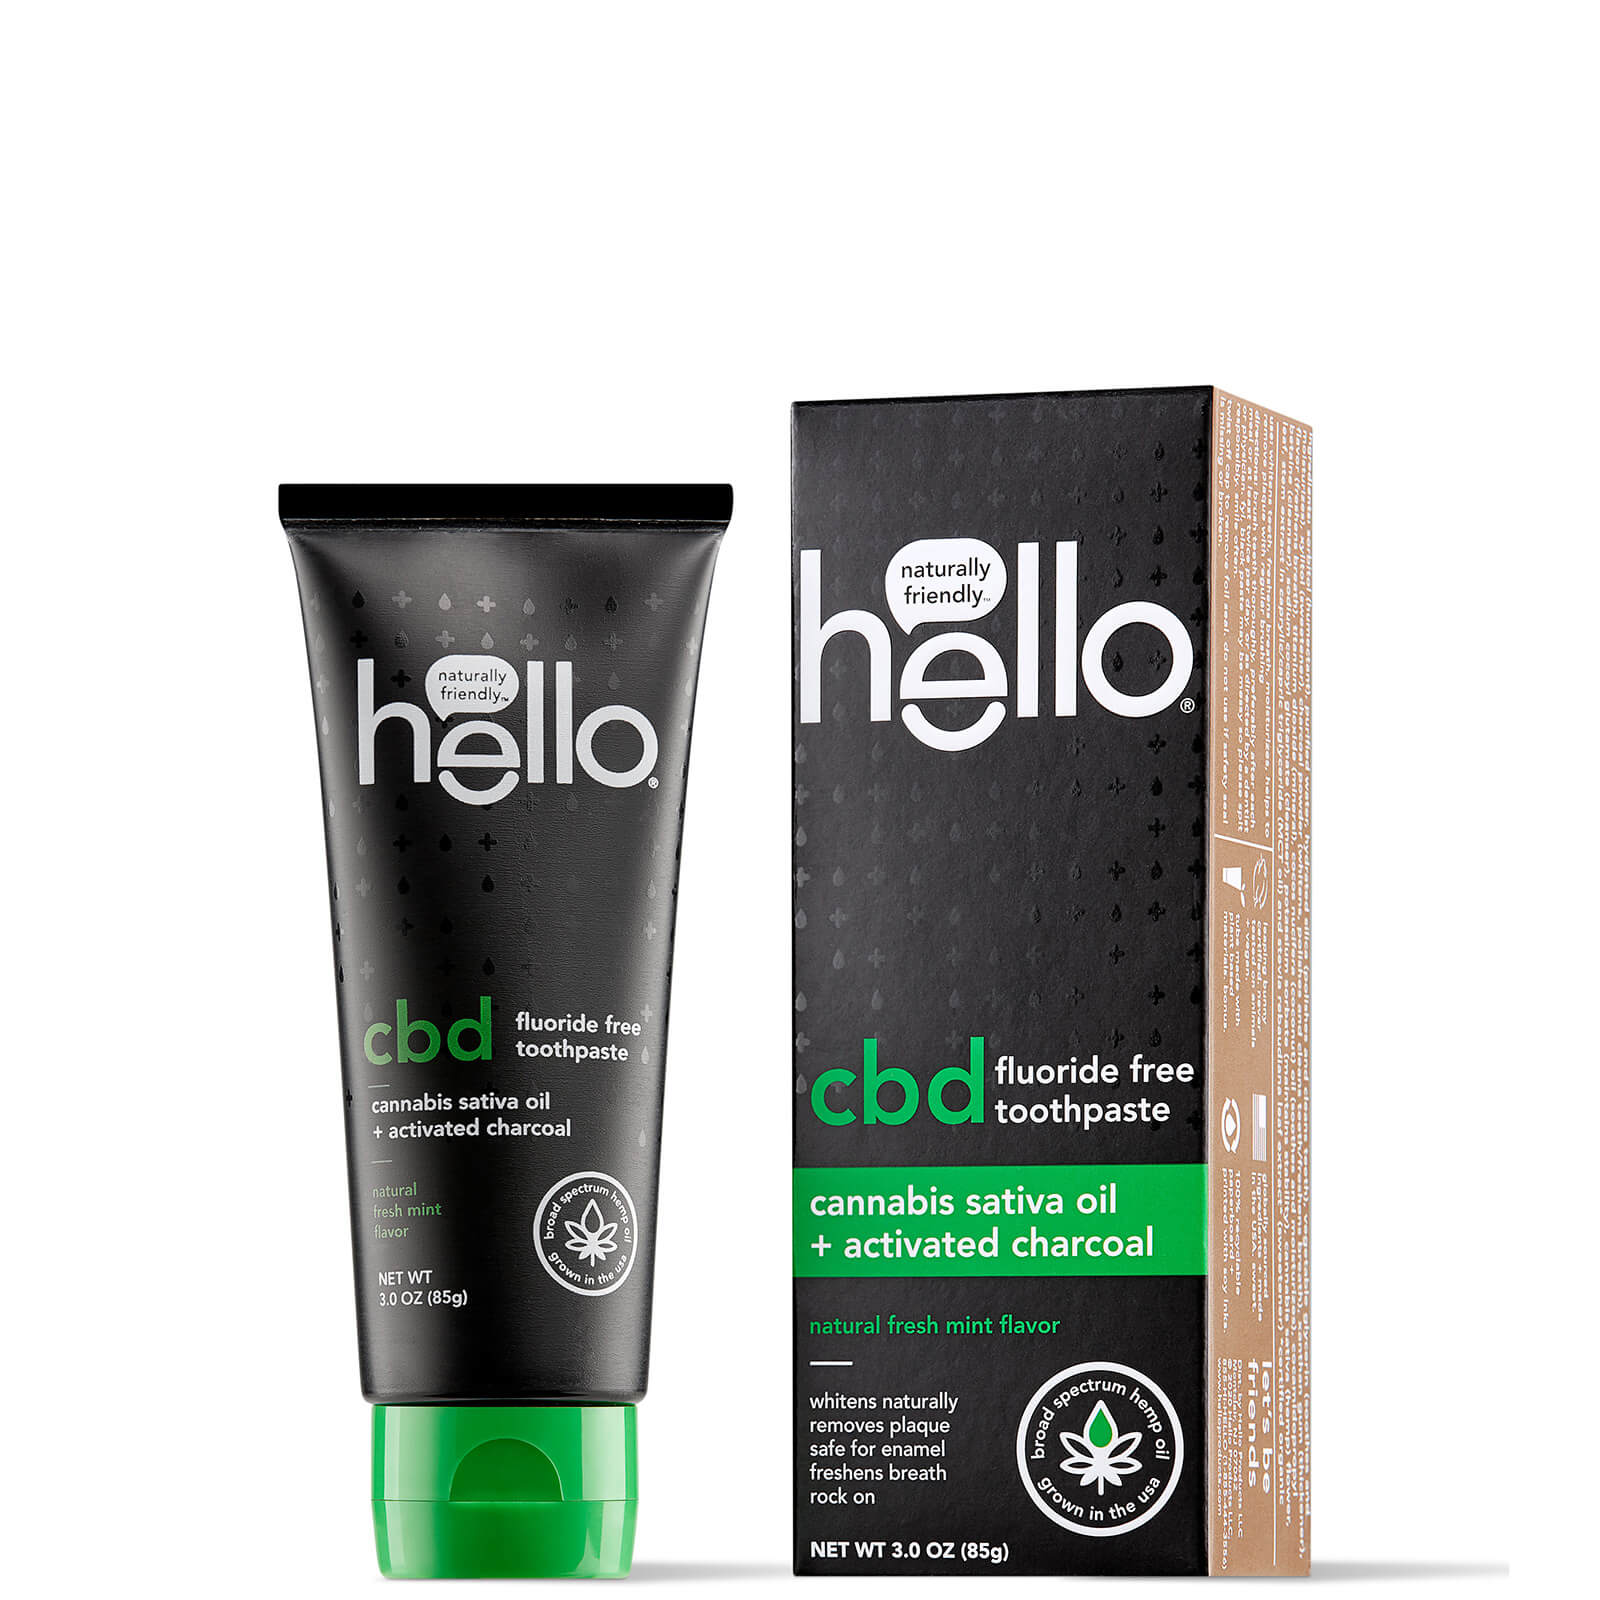 Hello Cbd Activated Charcoal Toothpaste 3 oz